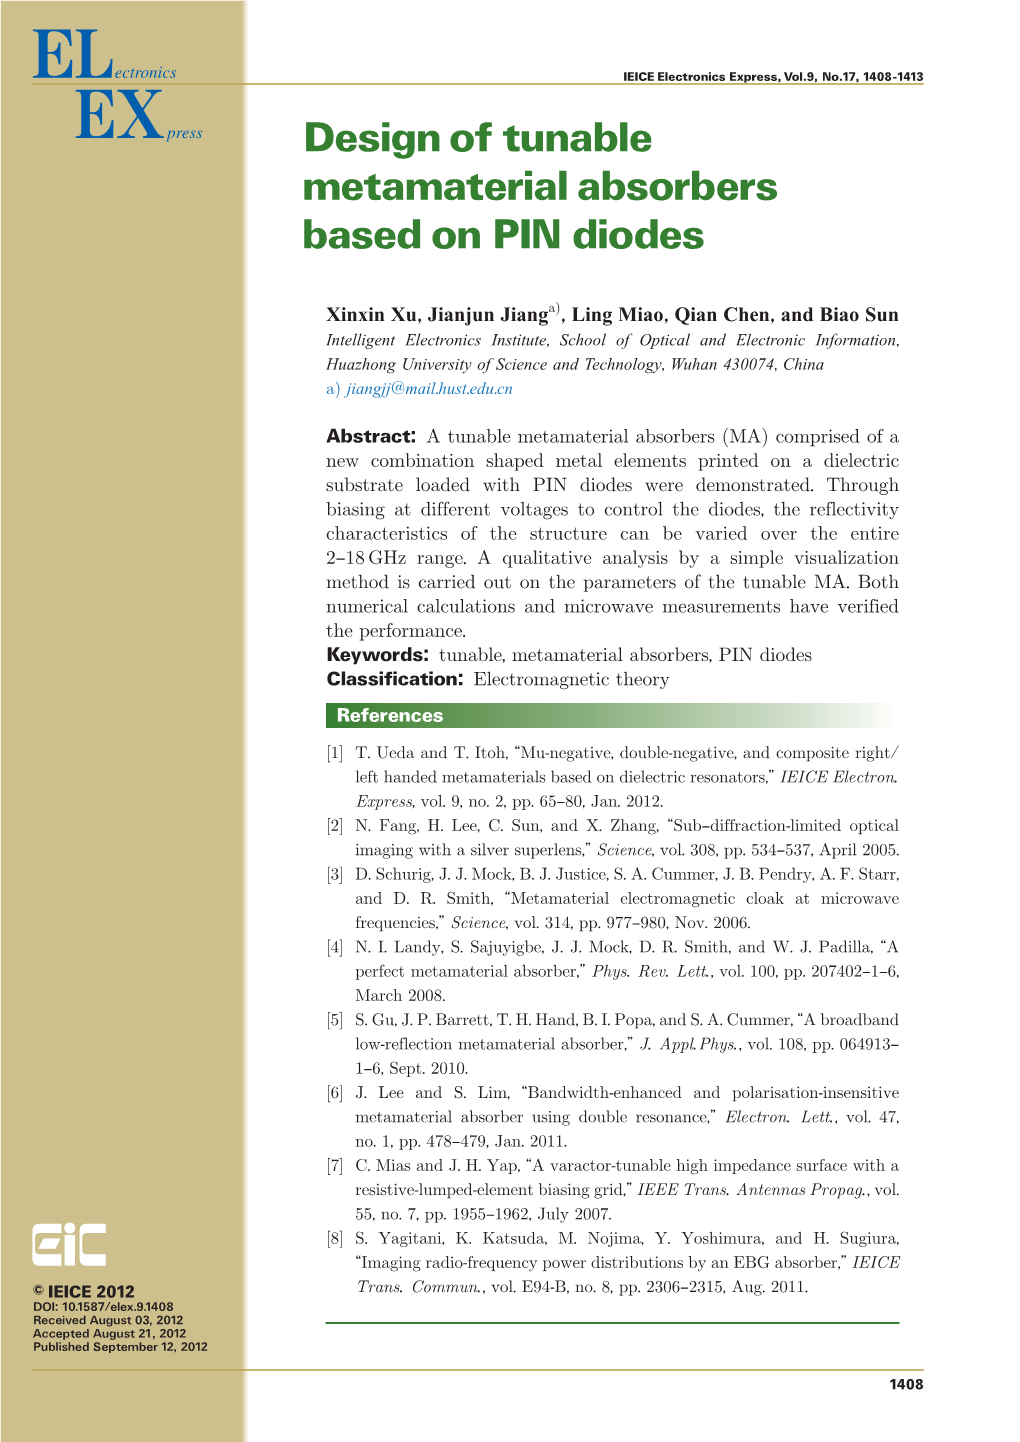 Design of Tunable Metamaterial Absorbers Based on PIN Diodes